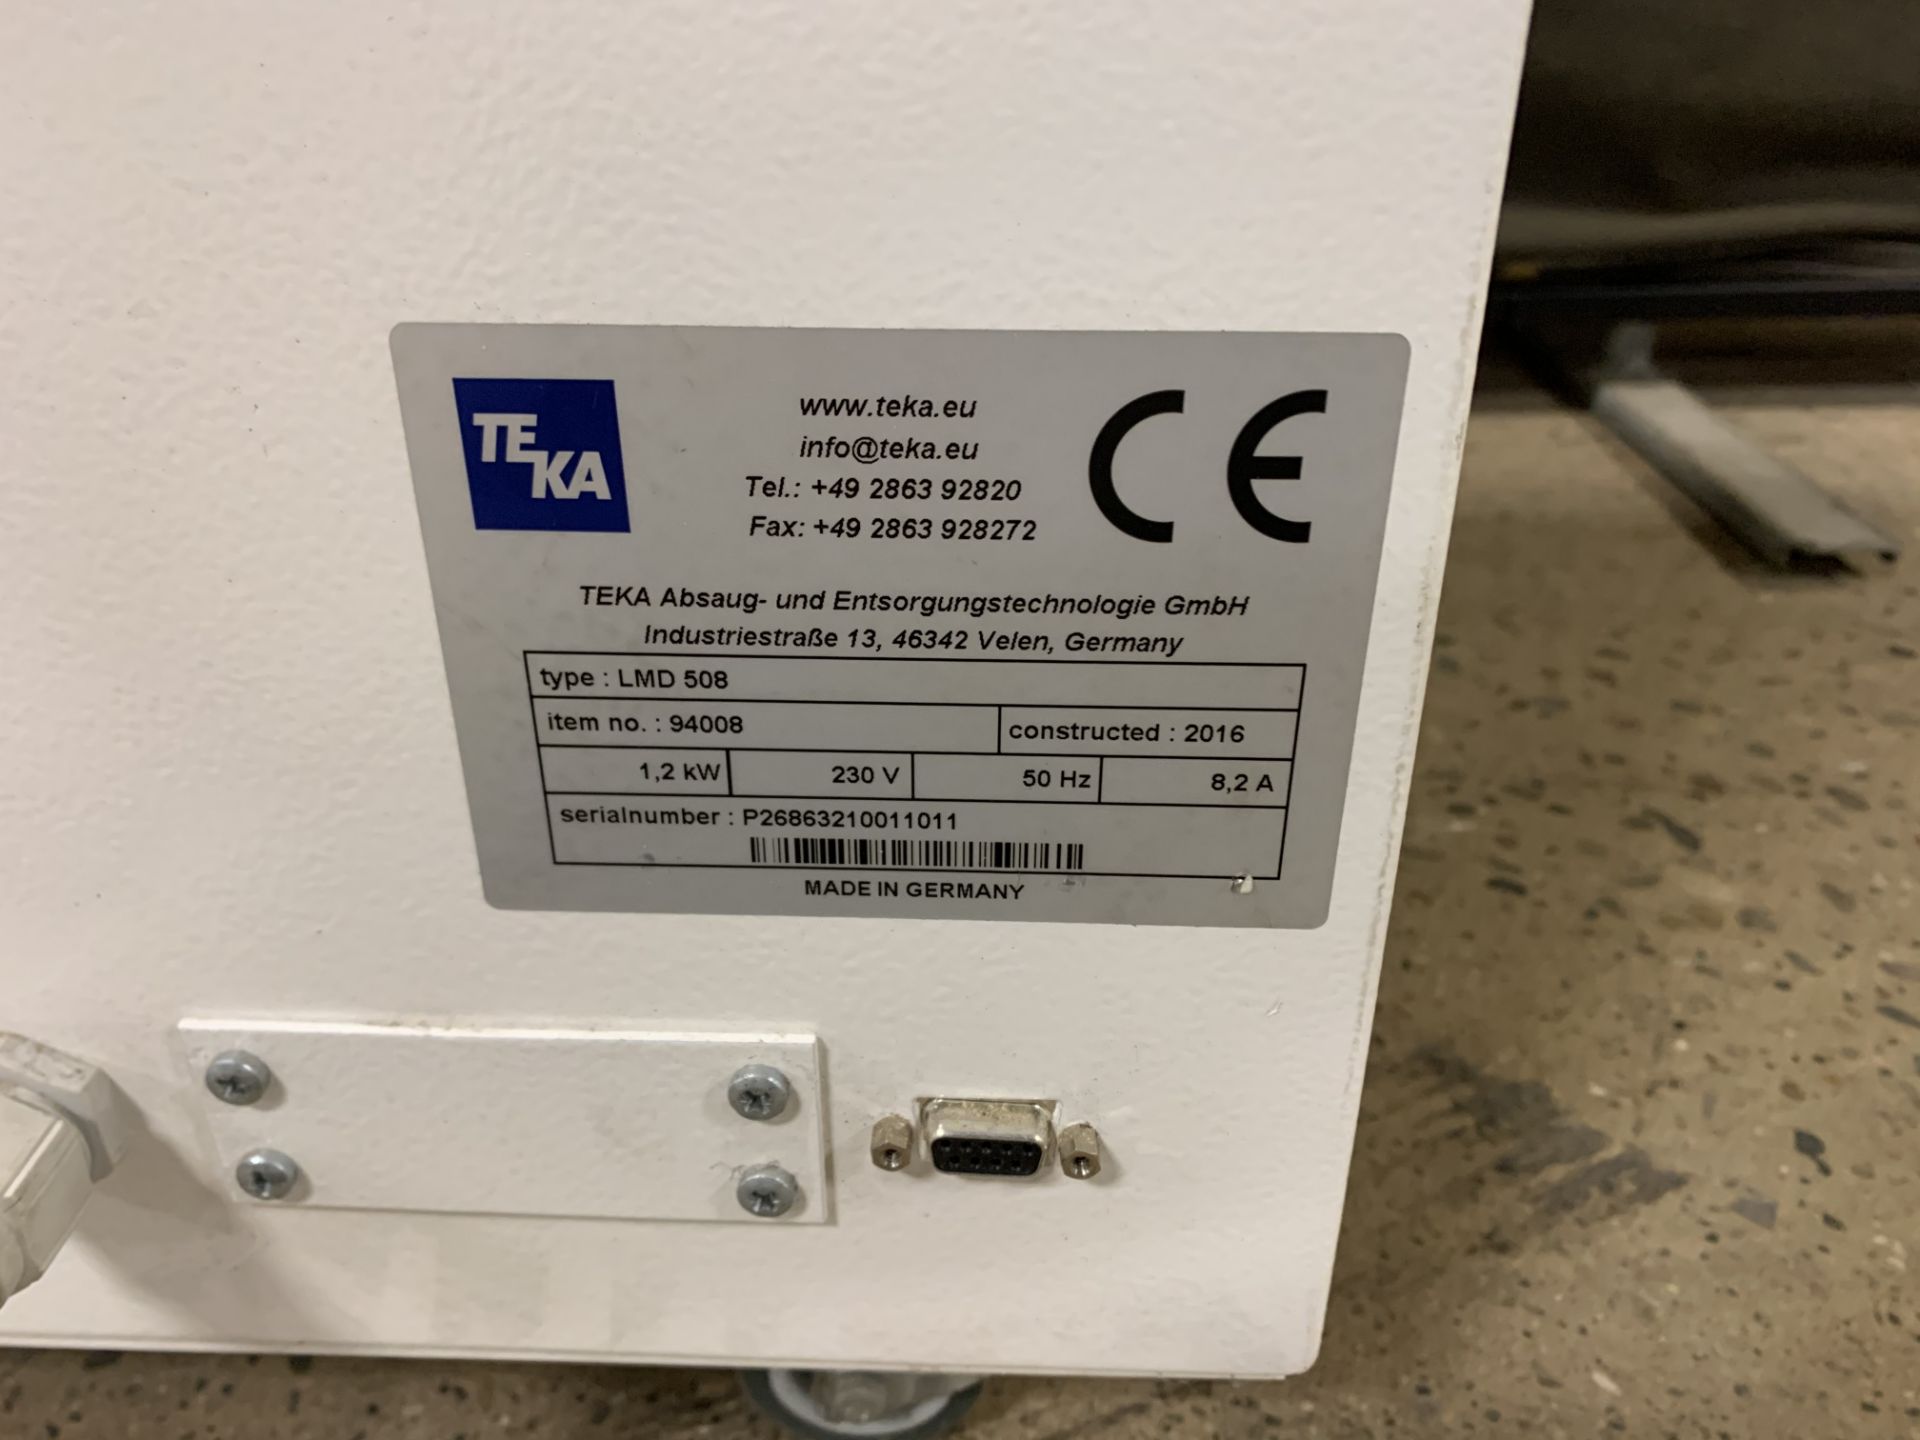 UNUSED - TEKA LMD 508 PORTABLE FUME/PARTICLE EXTRACTOR, EURO POWER CORD (EASY CONVERT TO 115V/240v) - Image 6 of 14